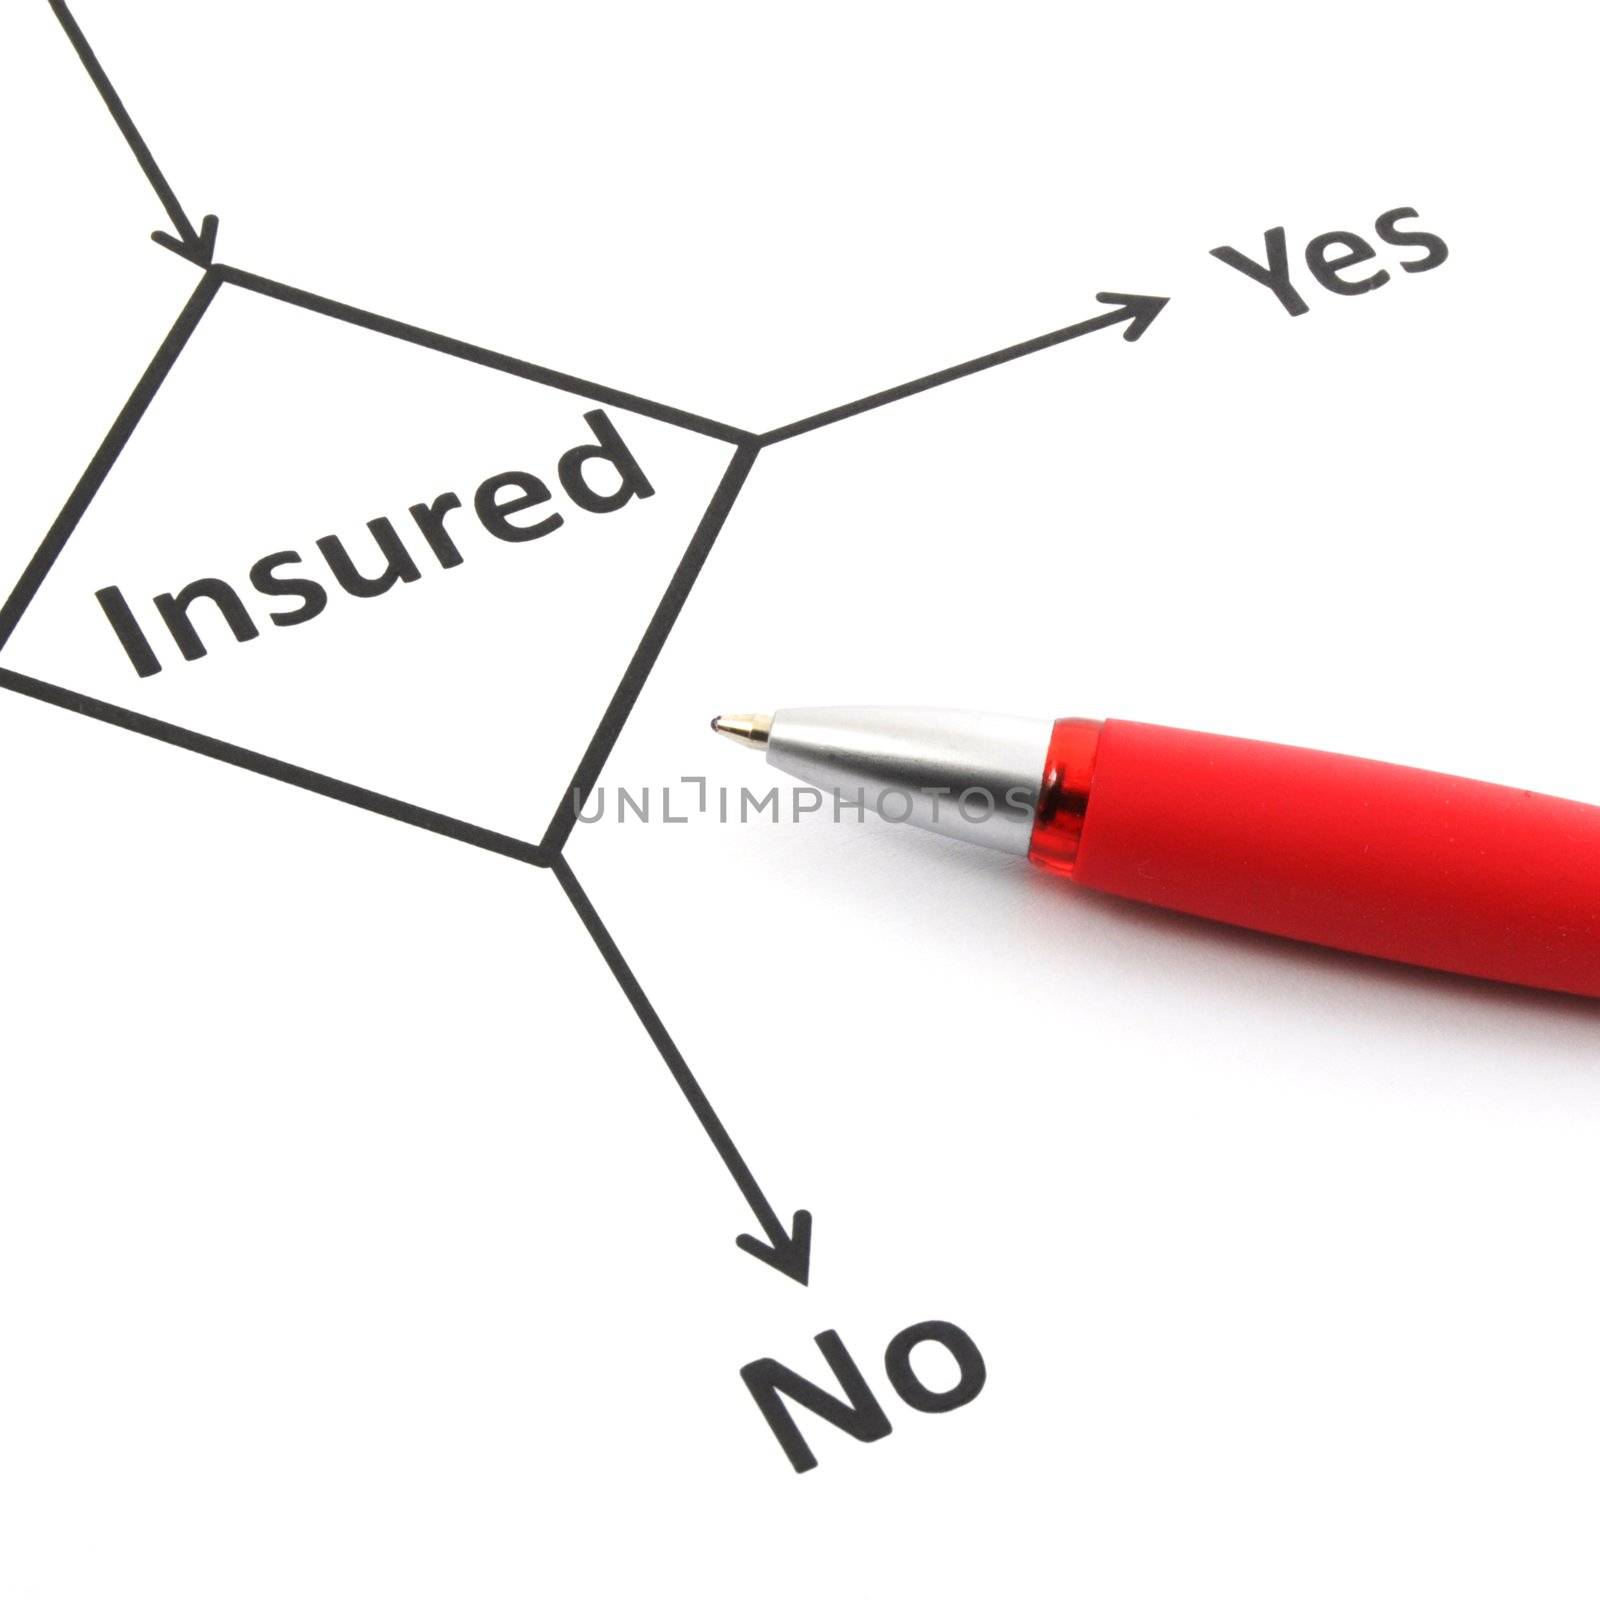 insurance or risk concept with flowchart and pen